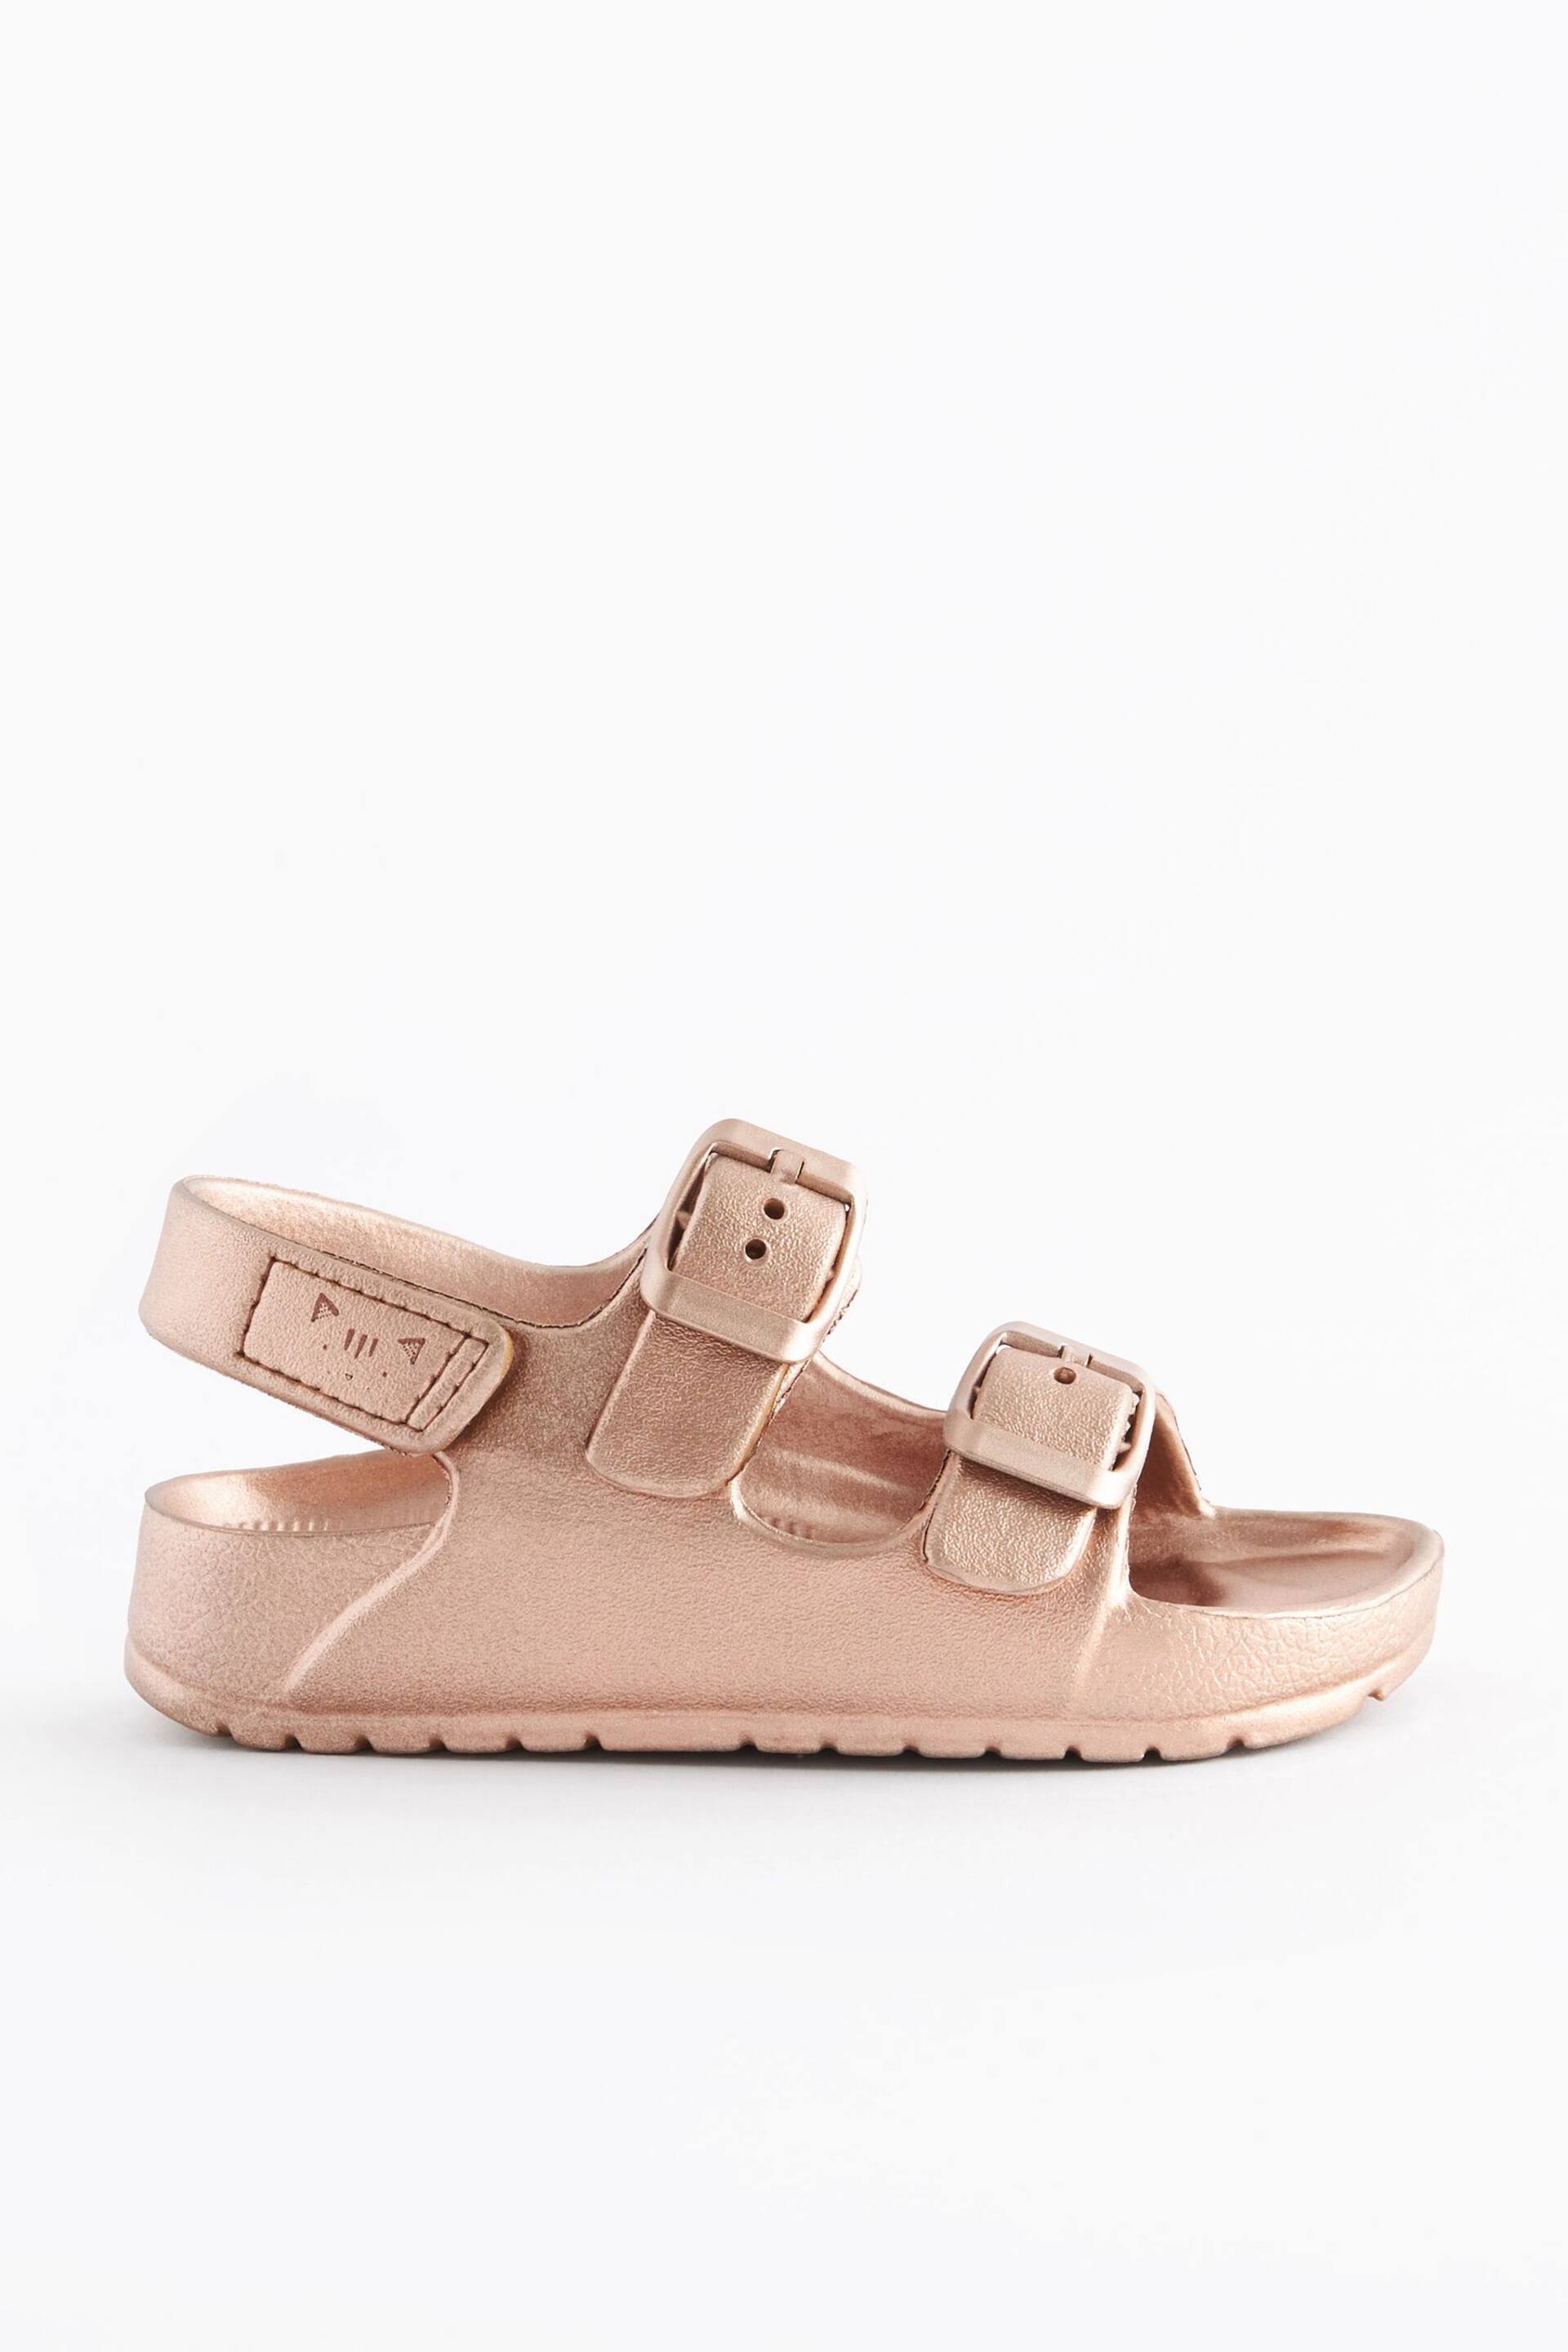 Rose Gold Two Strap Sandals - Image 2 of 6